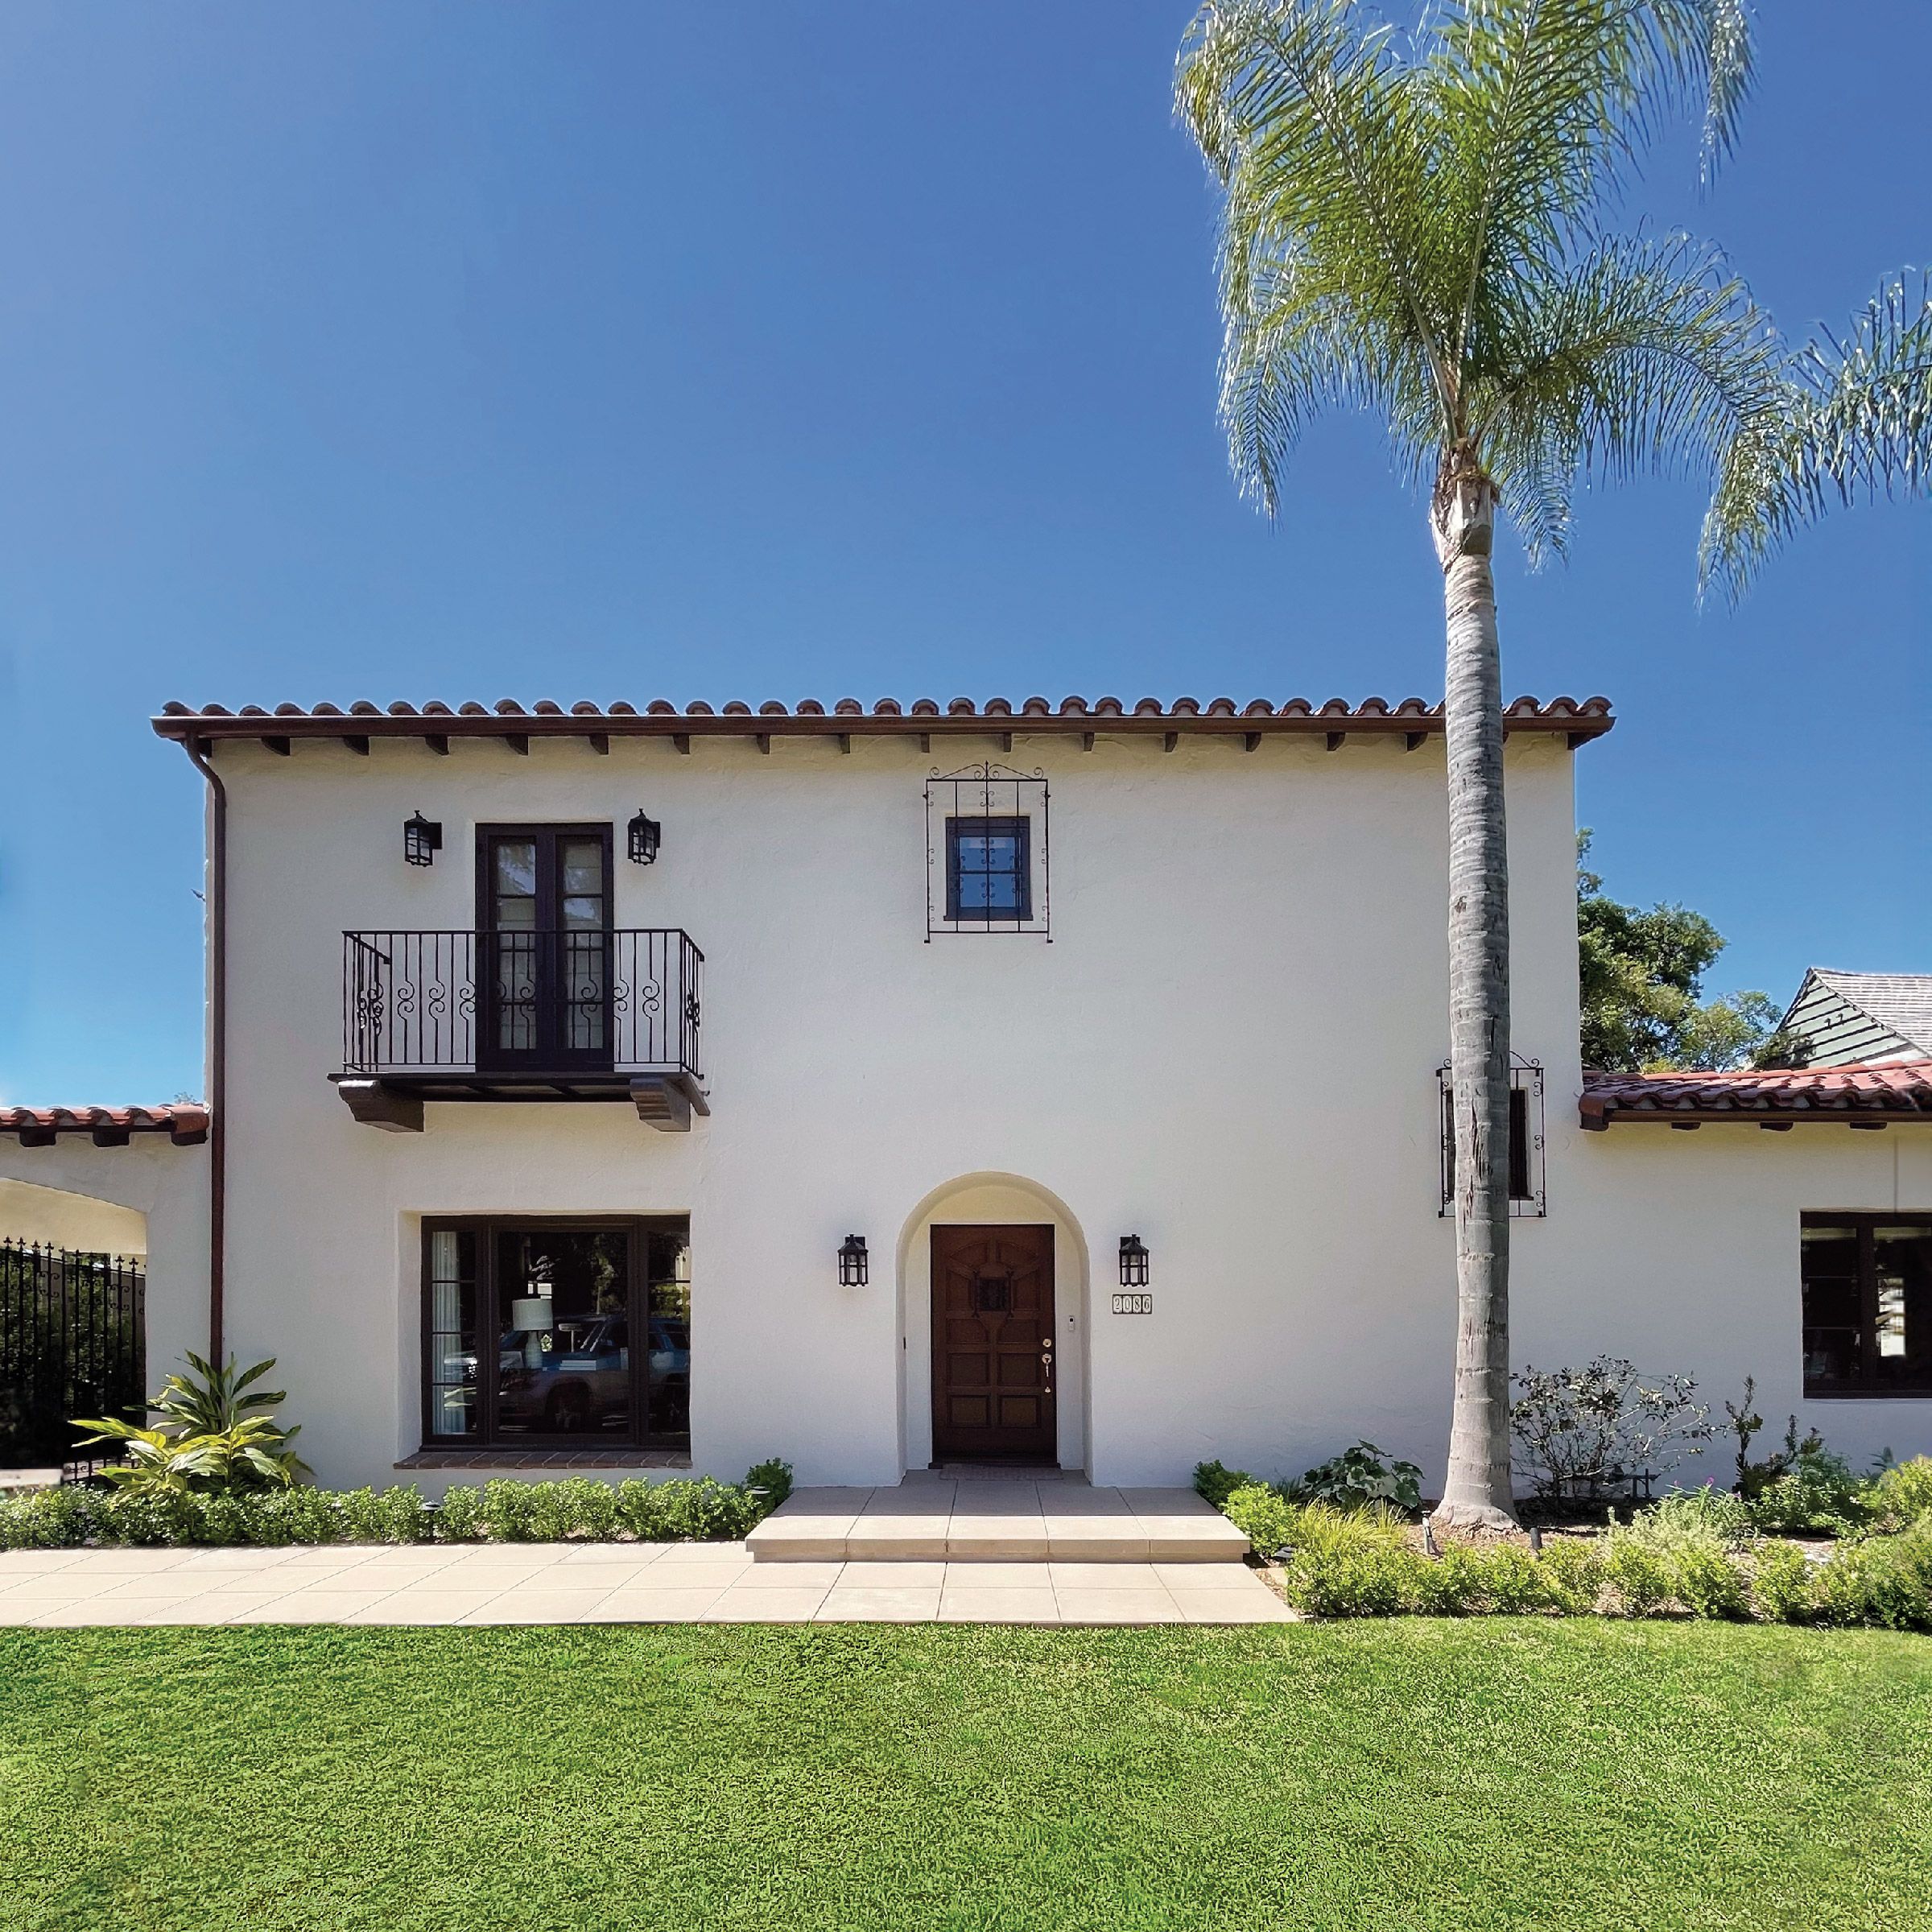 Exterior of spanish revival house with palm tree